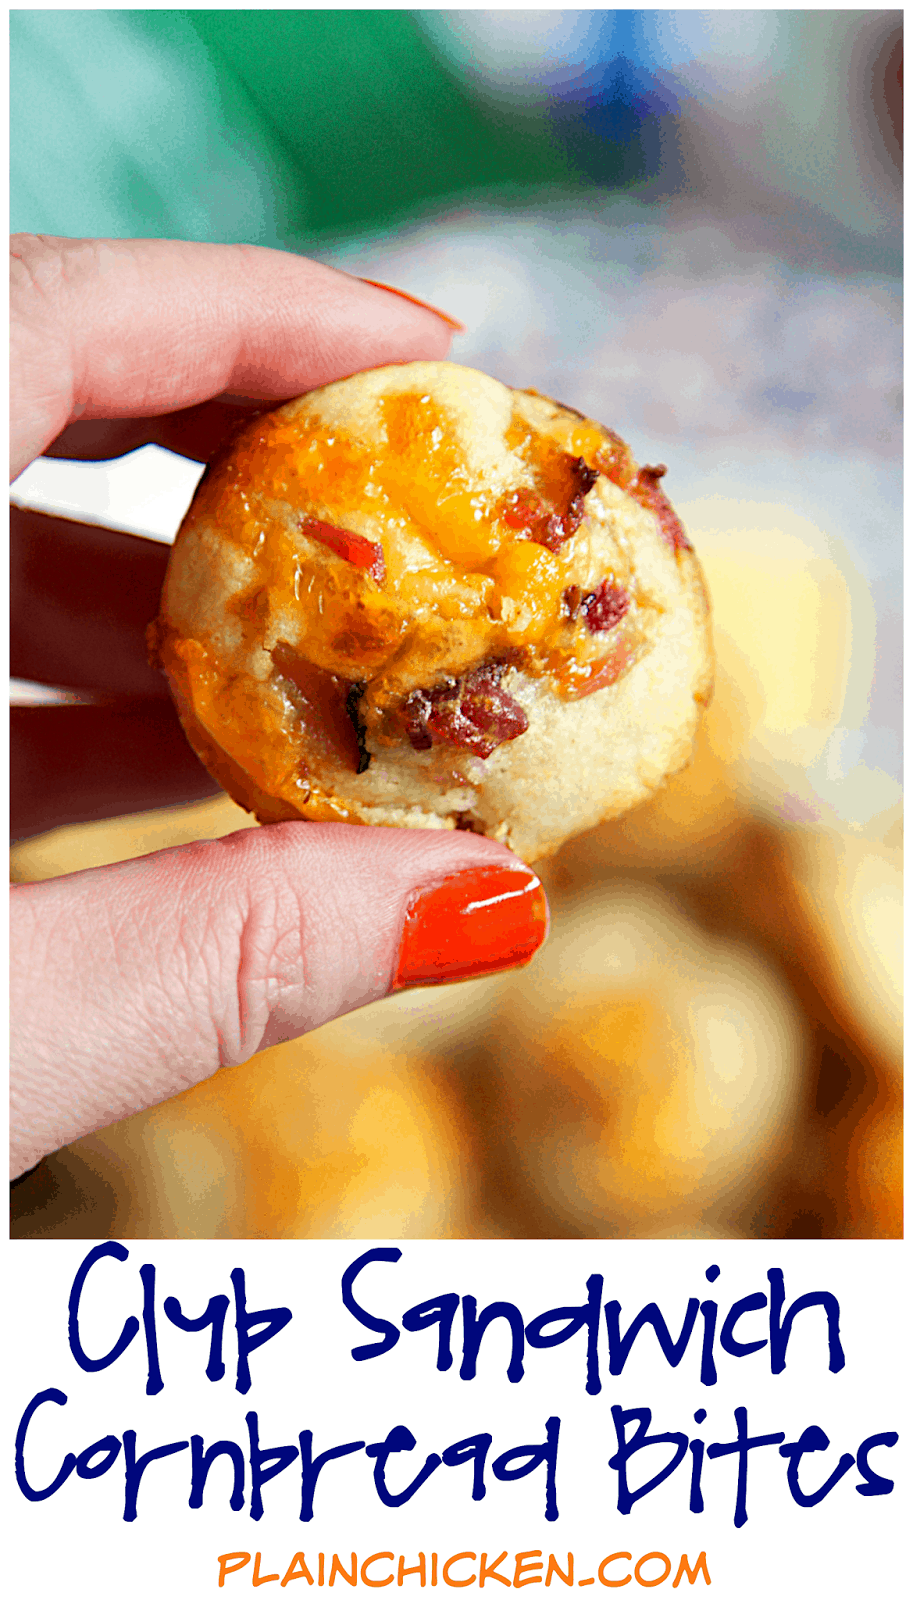 Club Sandwich Cornbread Bites Recipe - Martha White Cornbread mix topped with a ham, turkey, bacon, cheese and honey mustard mixture baked in mini muffin pans. Serve with additional honey mustard. GREAT for tailgating, brunch, baby showers or any other type of party. We've also eaten these for lunch and dinner. Ready in under 15 minutes!